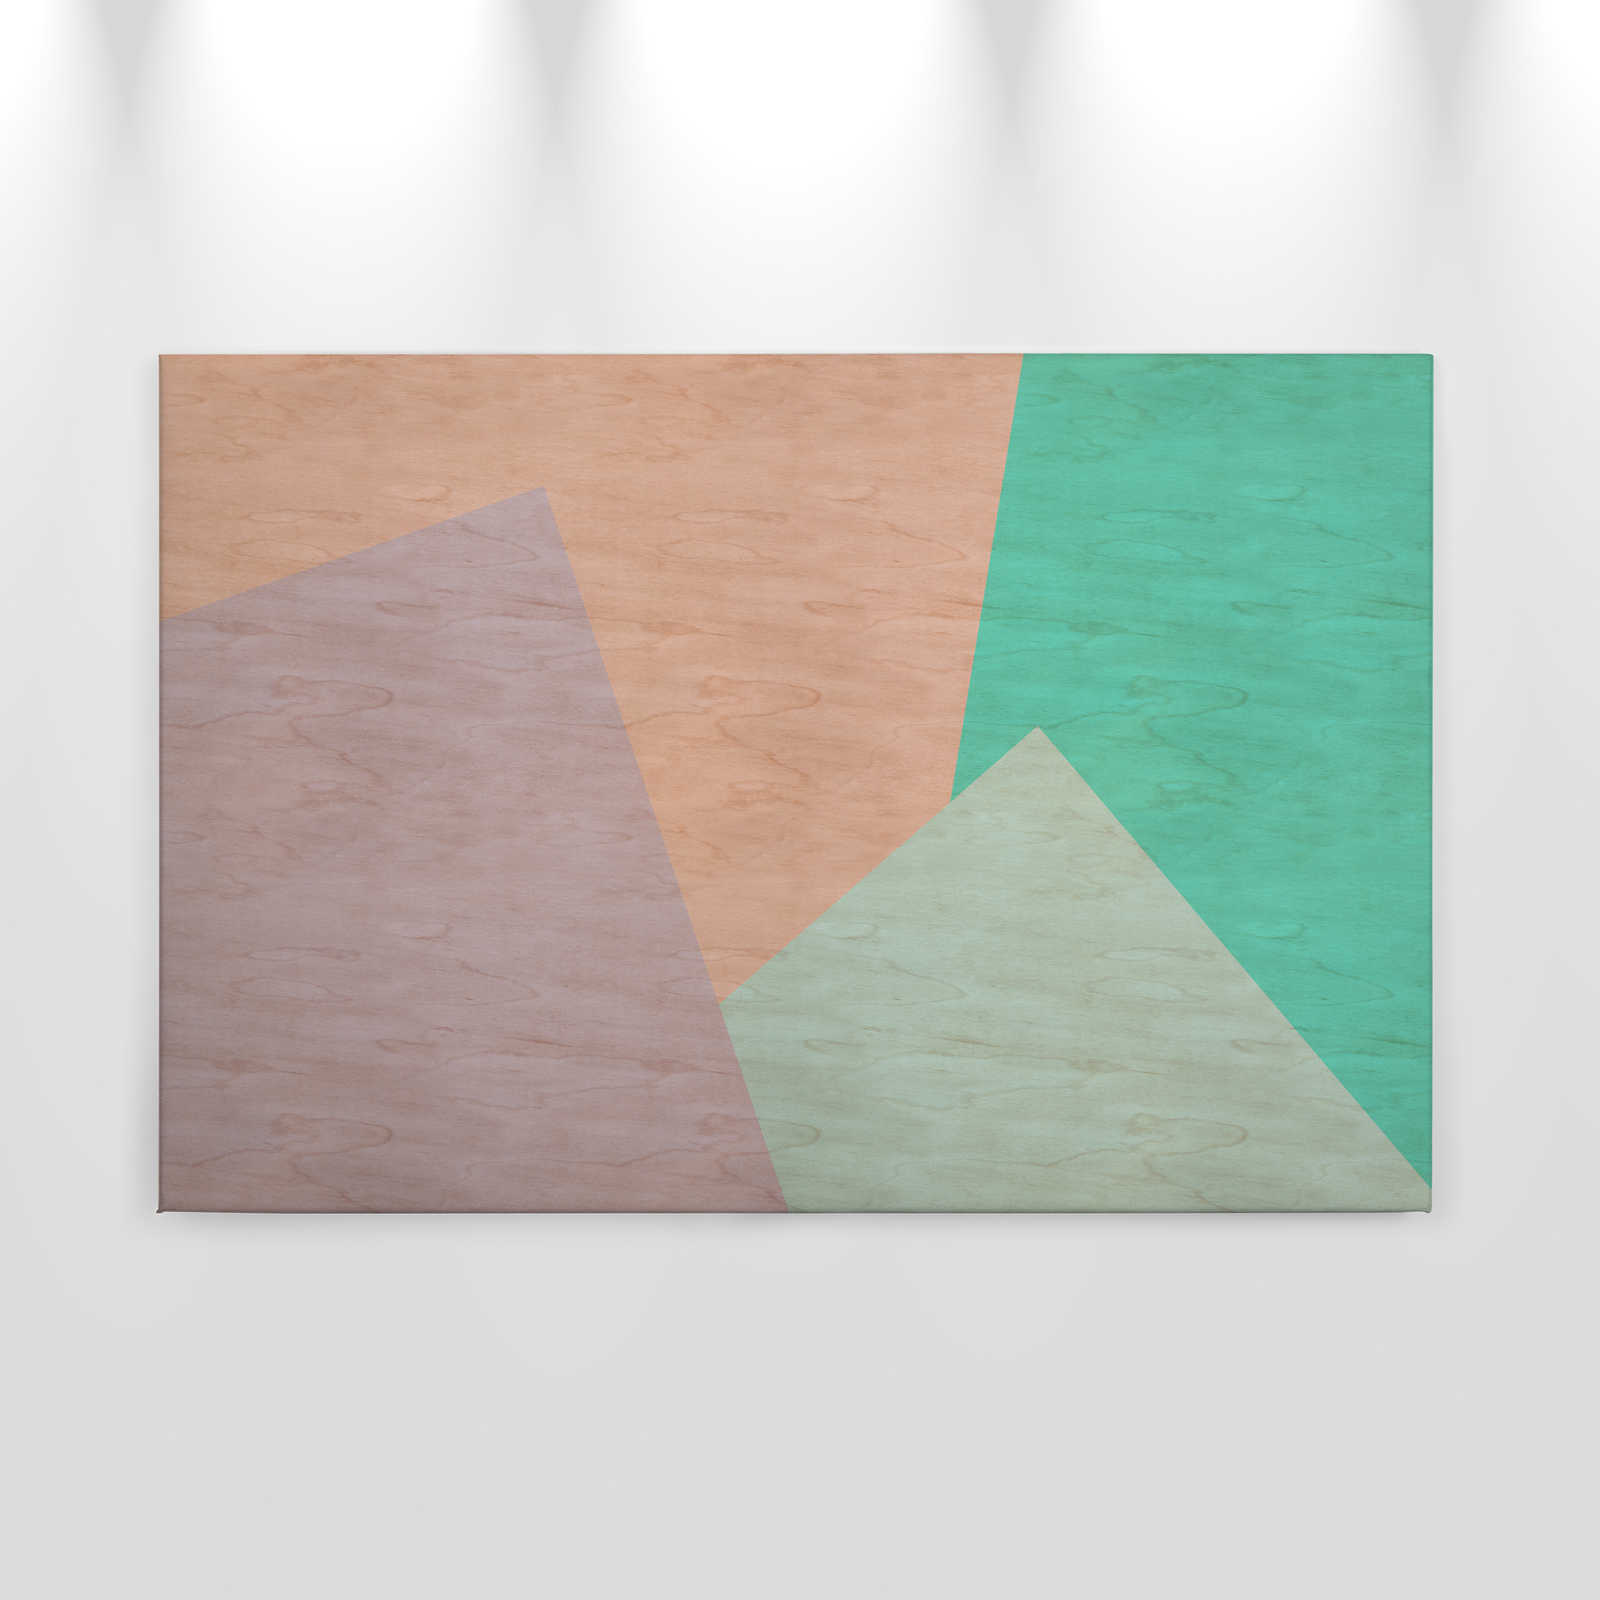             Inaly 1 - Abstract colourful canvas painting in plywood structure - 0.90 m x 0.60 m
        